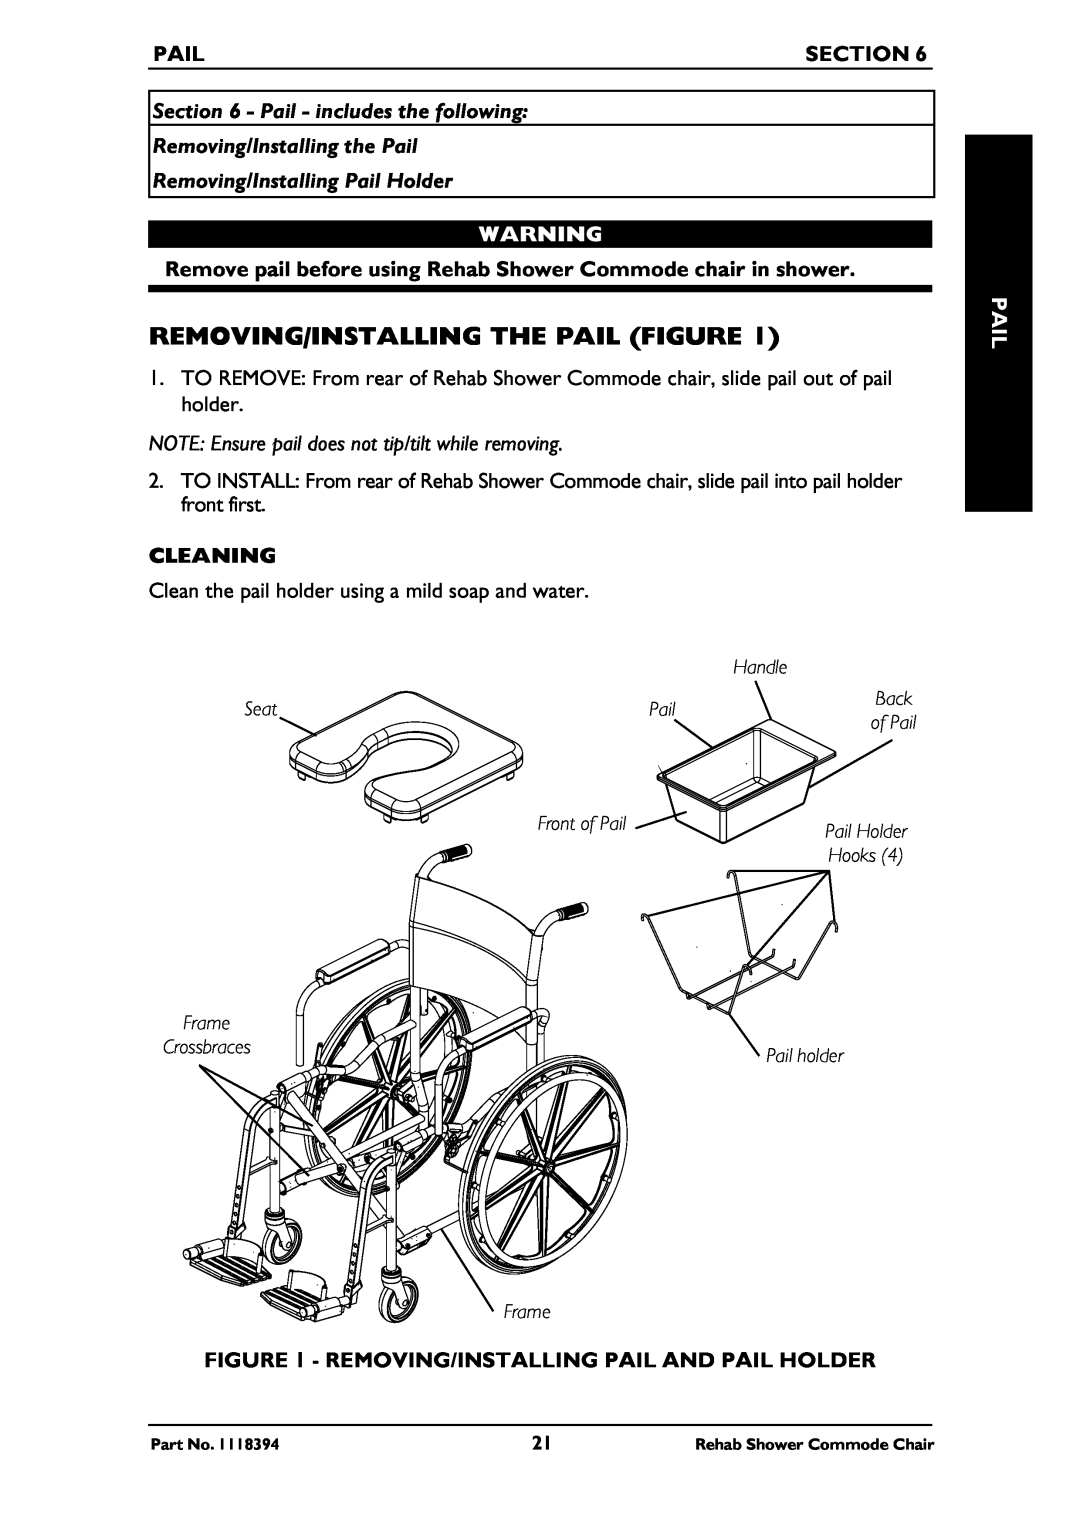 Invacare 6795, 6895, 6891 manual Removing/Installing The Pail Figure, Section, Pail - includes the following, Cleaning 